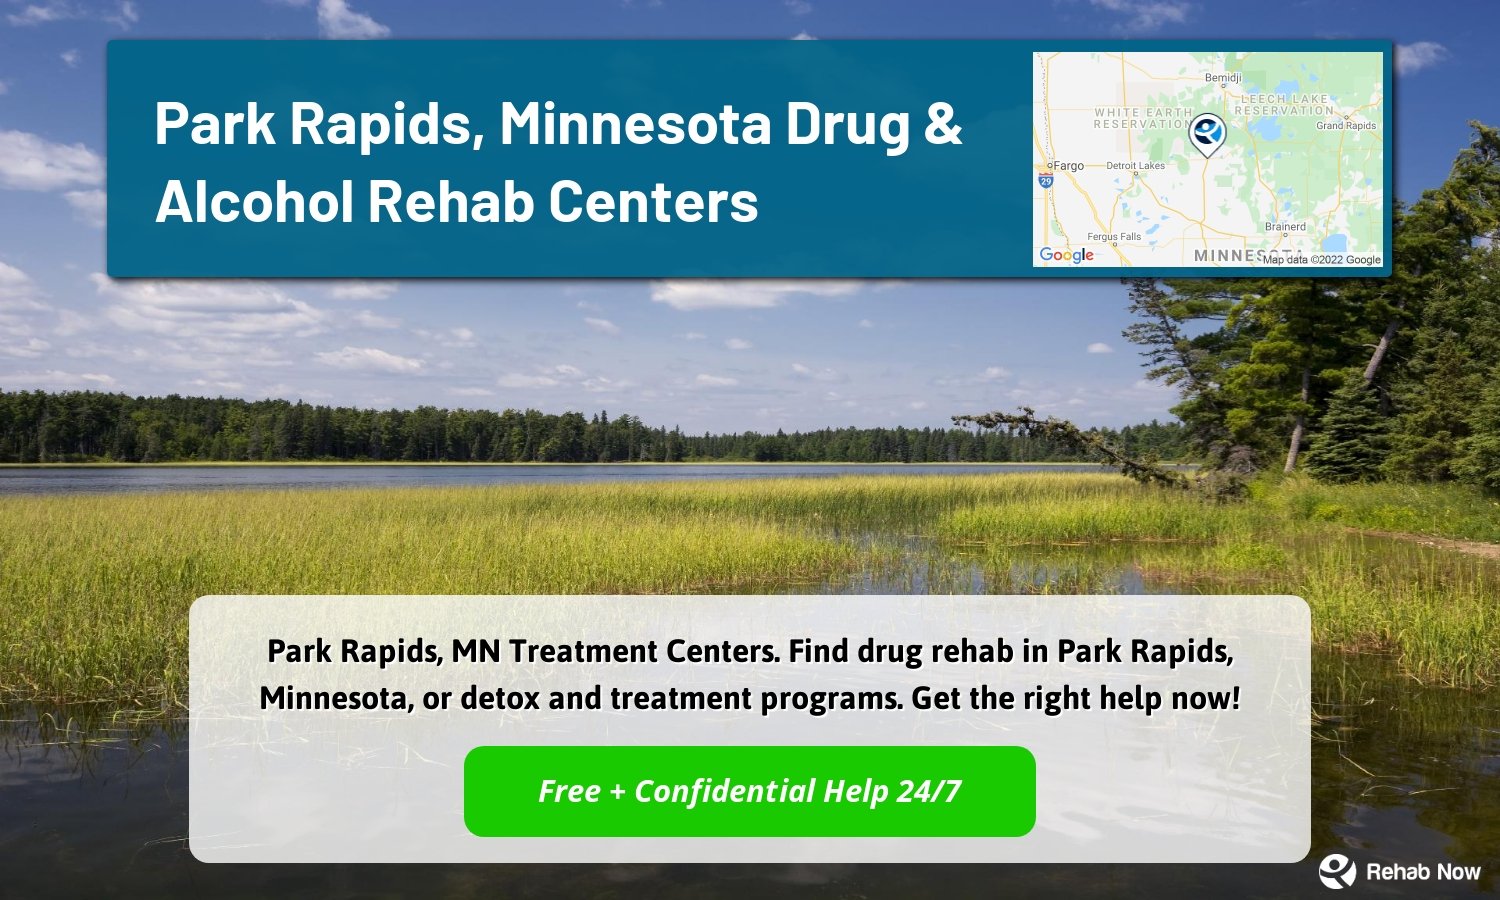 Park Rapids, MN Treatment Centers. Find drug rehab in Park Rapids, Minnesota, or detox and treatment programs. Get the right help now!